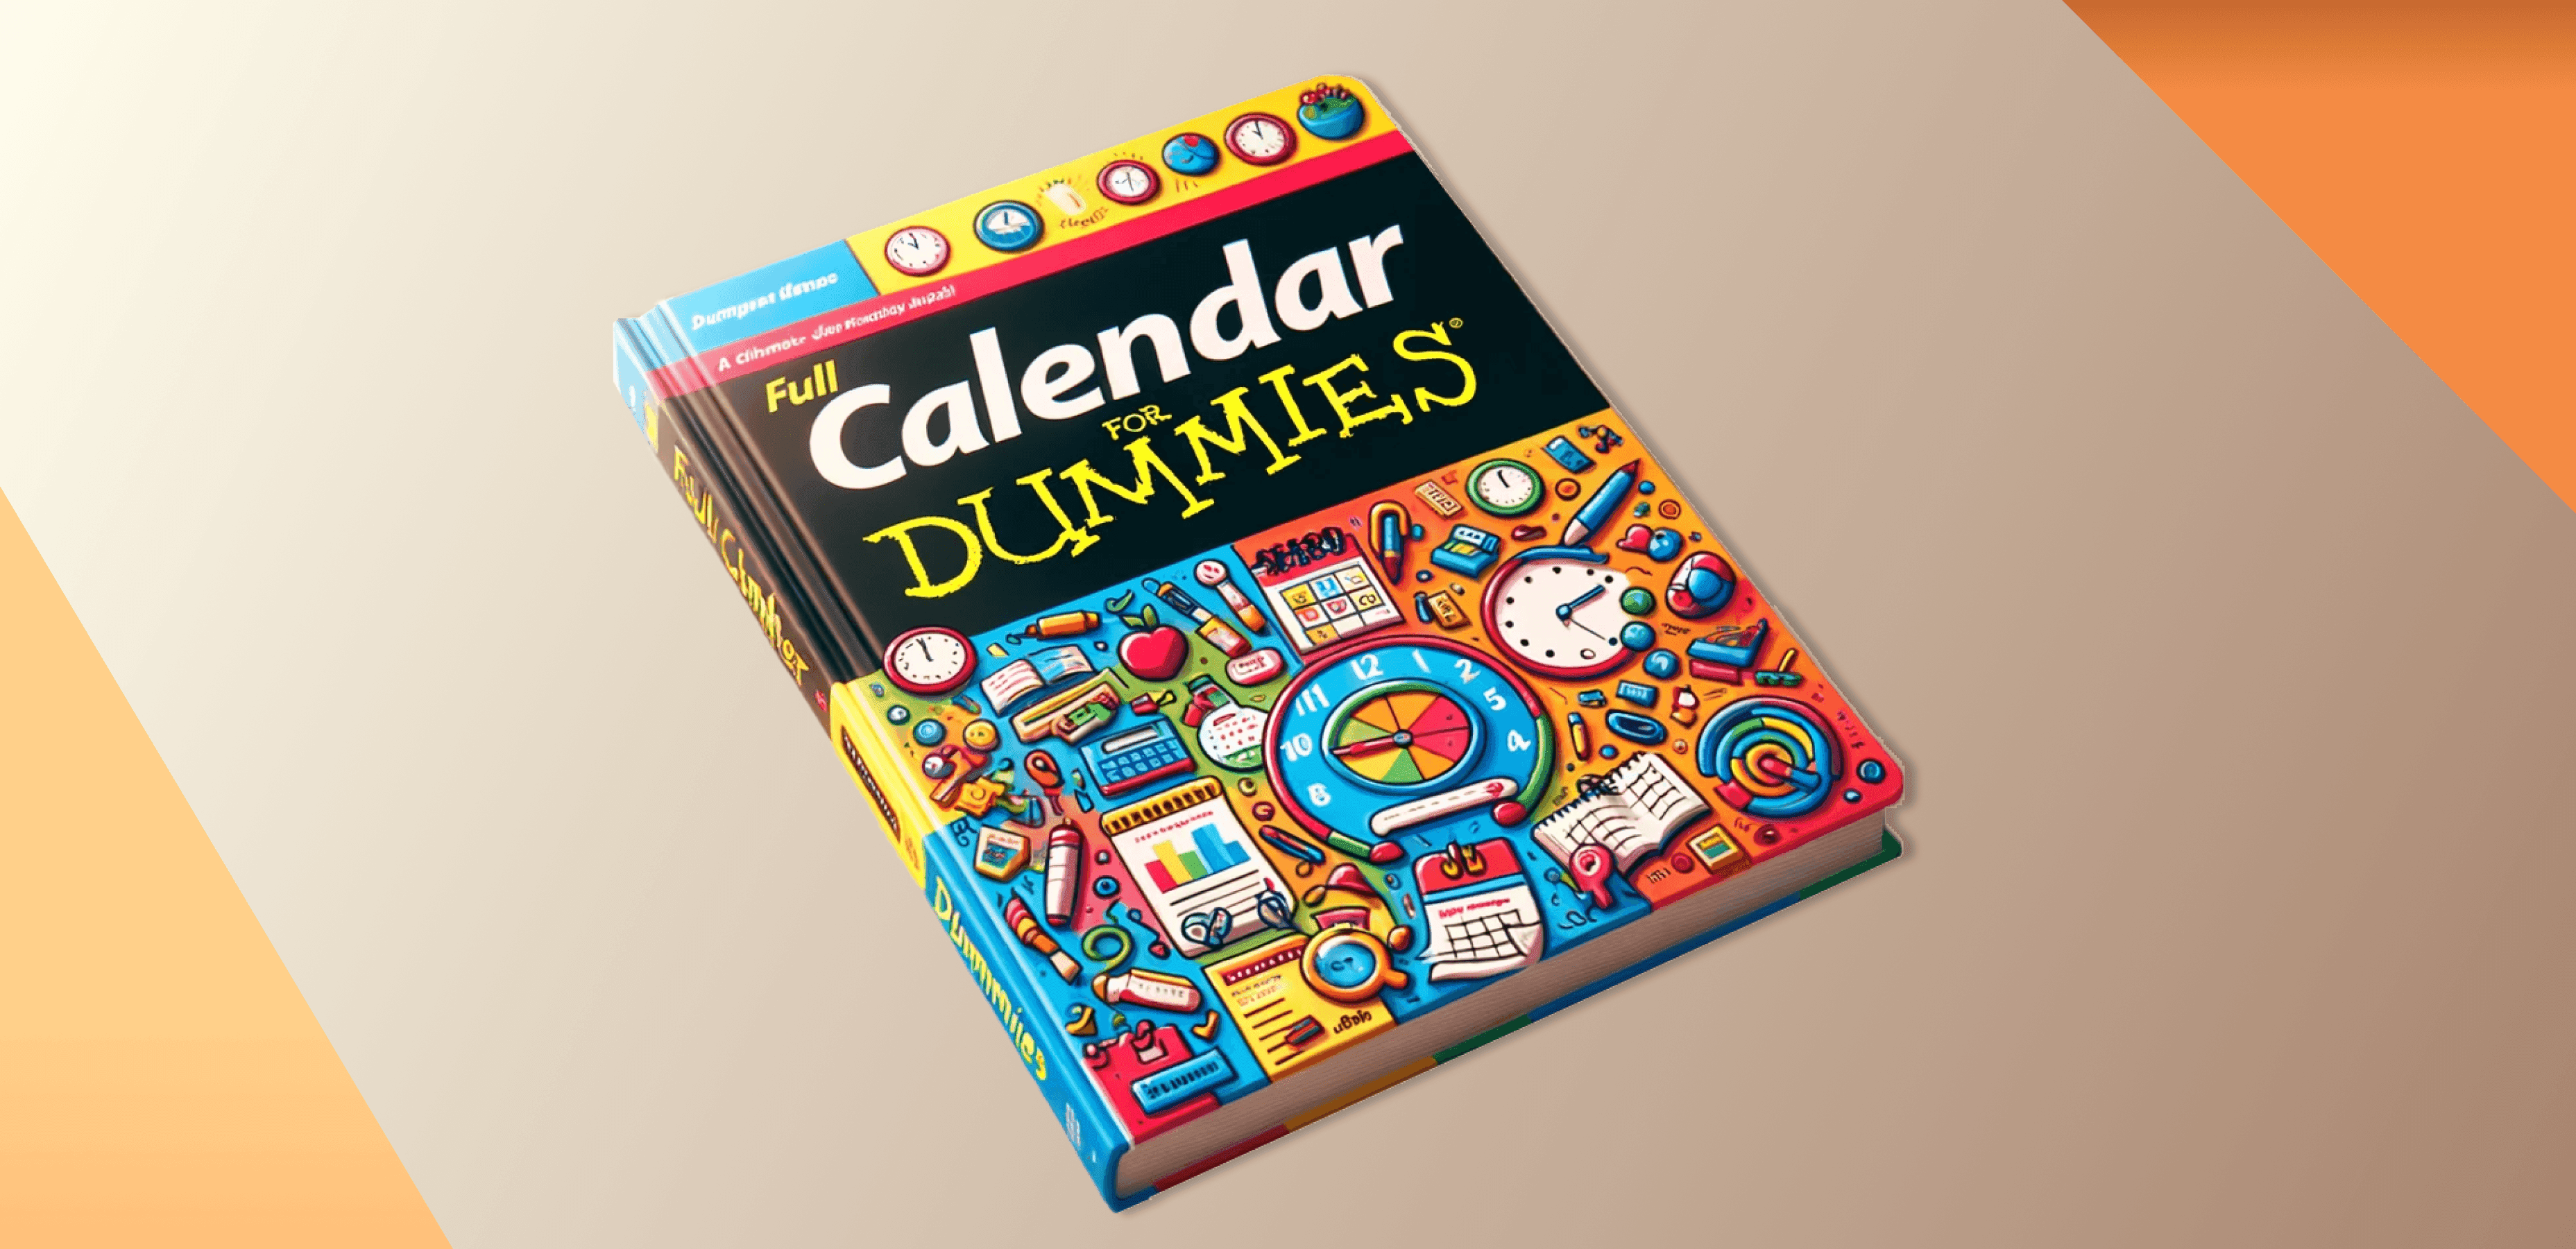 OutSystems Full Calendar for Dummies's article image